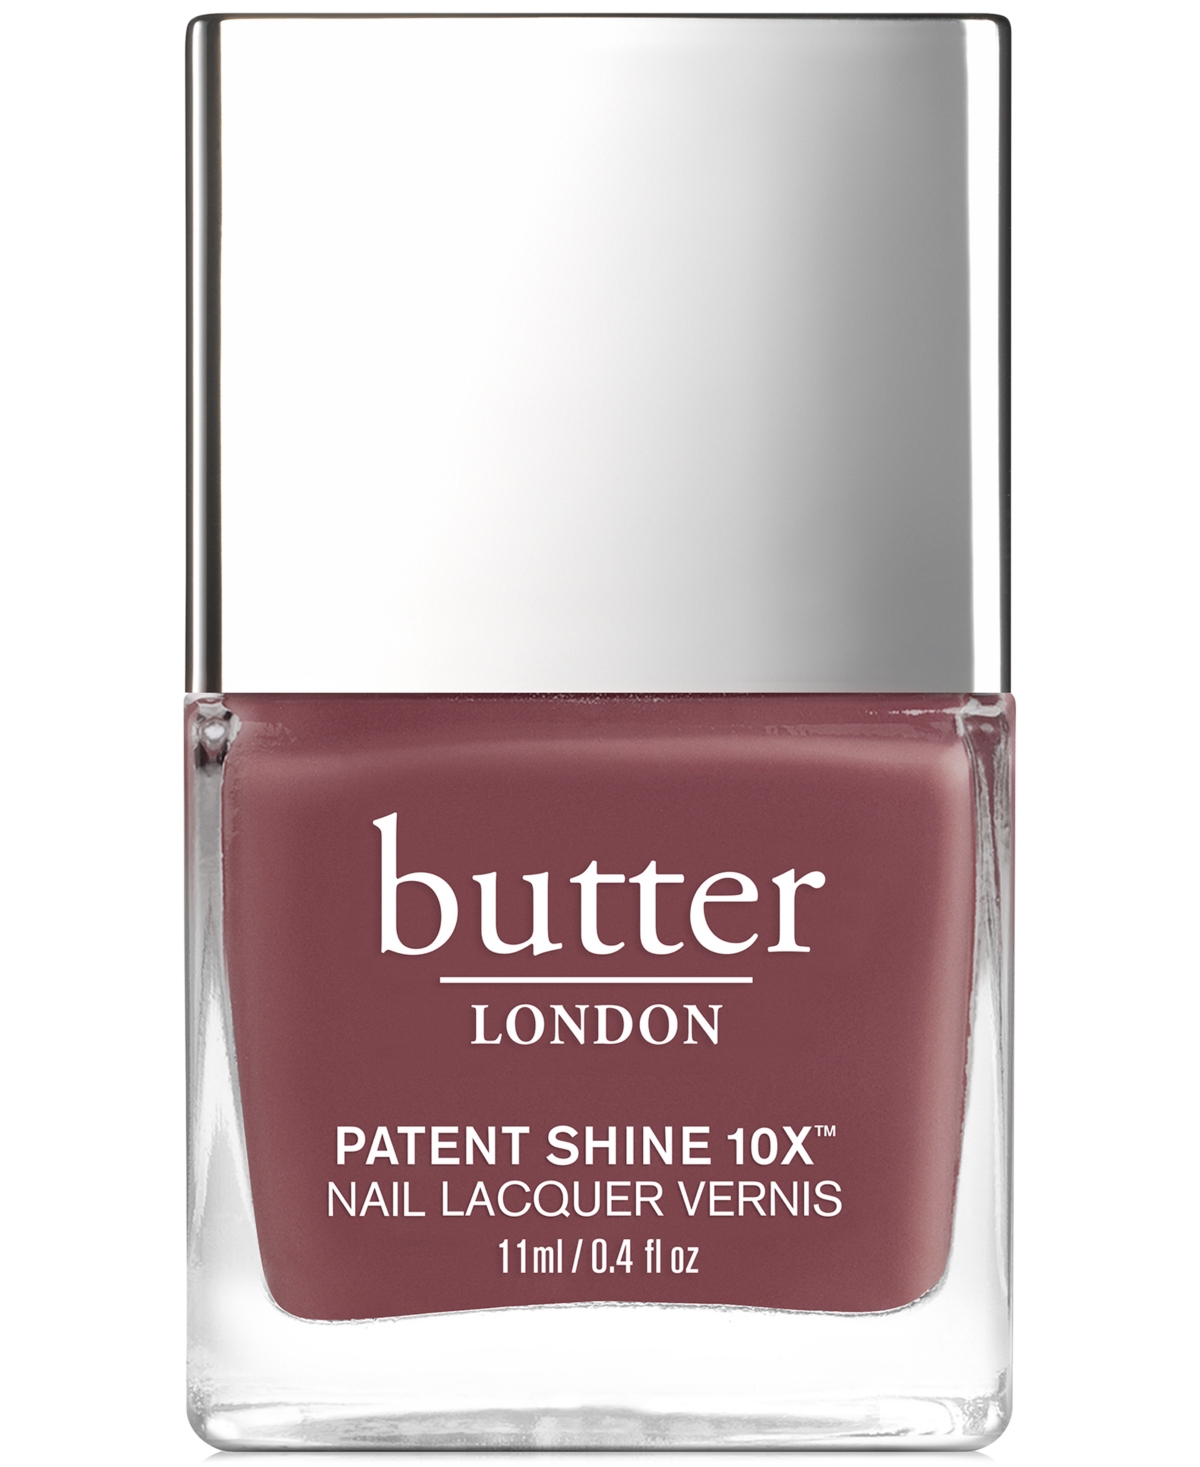 Butter London Patent Shine 10x Nail Lacquer In Toff (dusty Mauve Crã¨me)